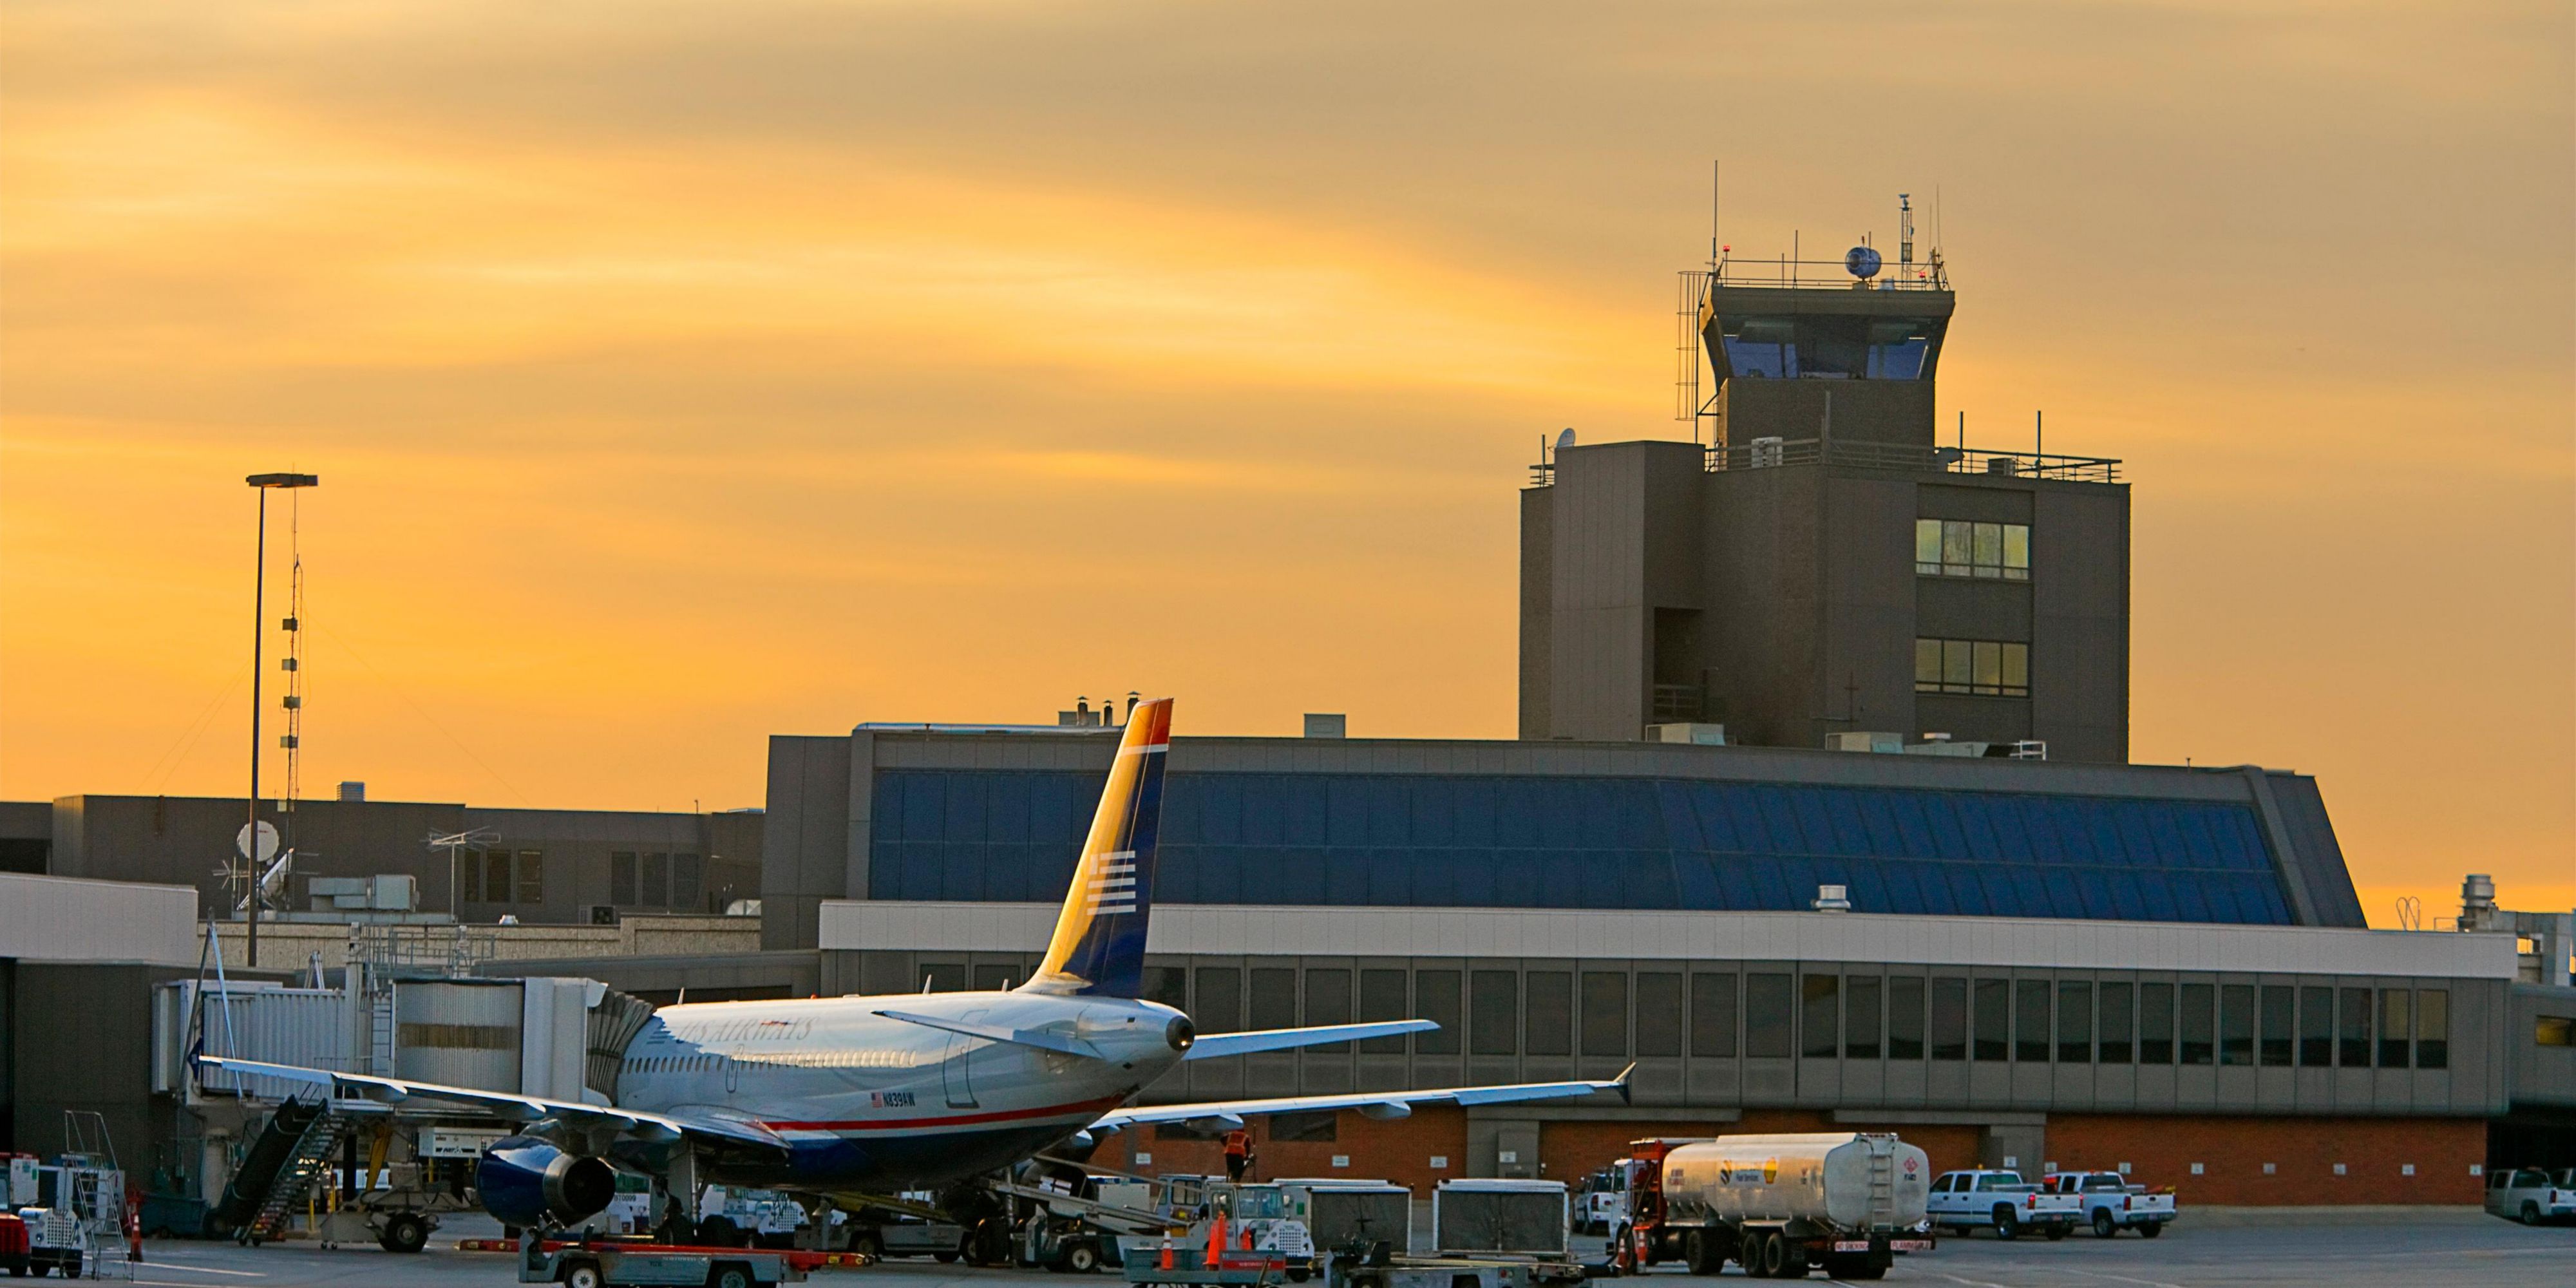 Salt Lake City International Airport is making the next generation of airport design.  The Airport is a short distance from the hotel.